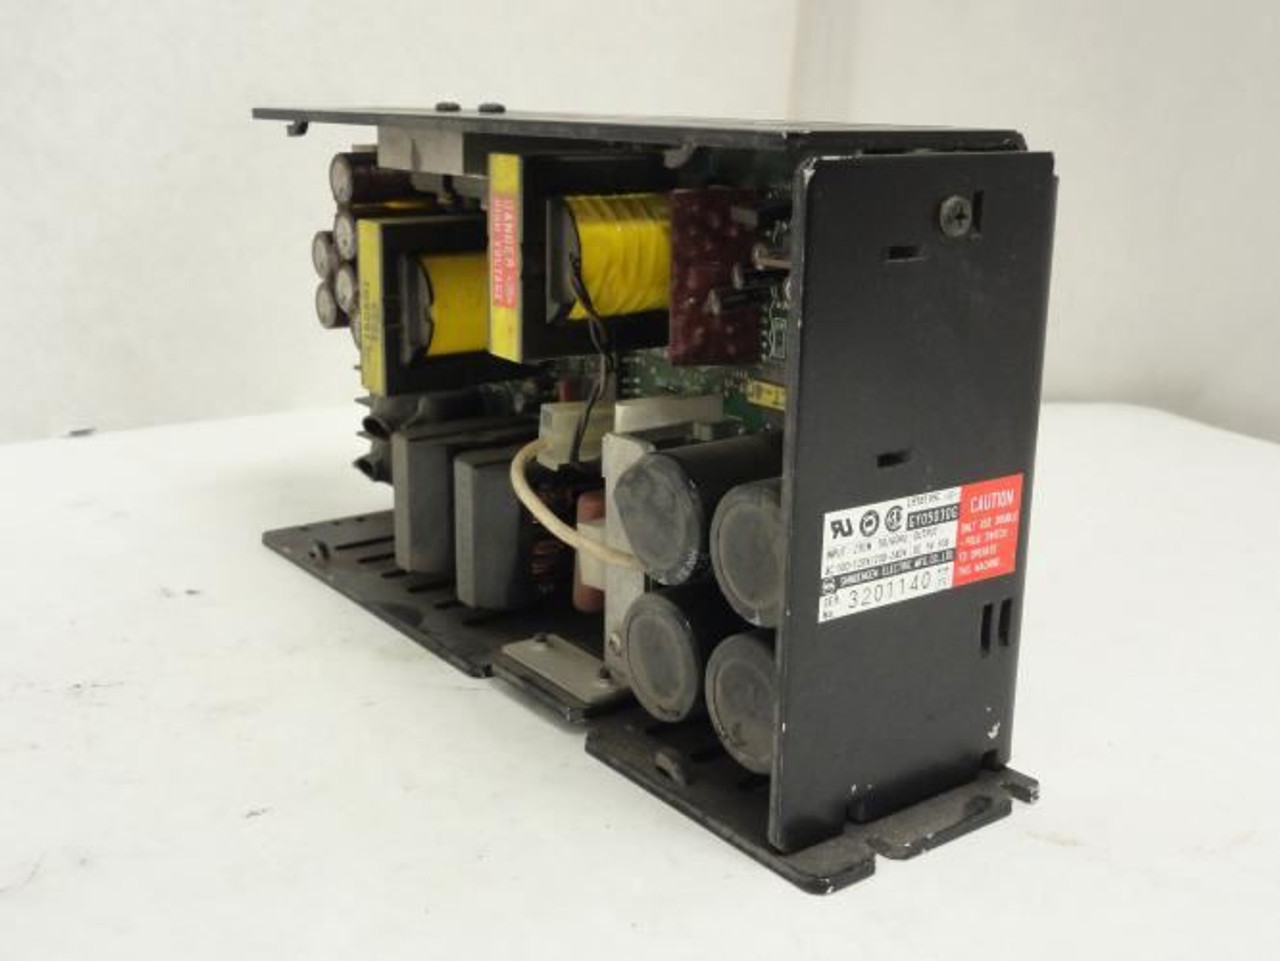 Shindengen GY05030GN; Power Supply 100-120VAC@3.6A In